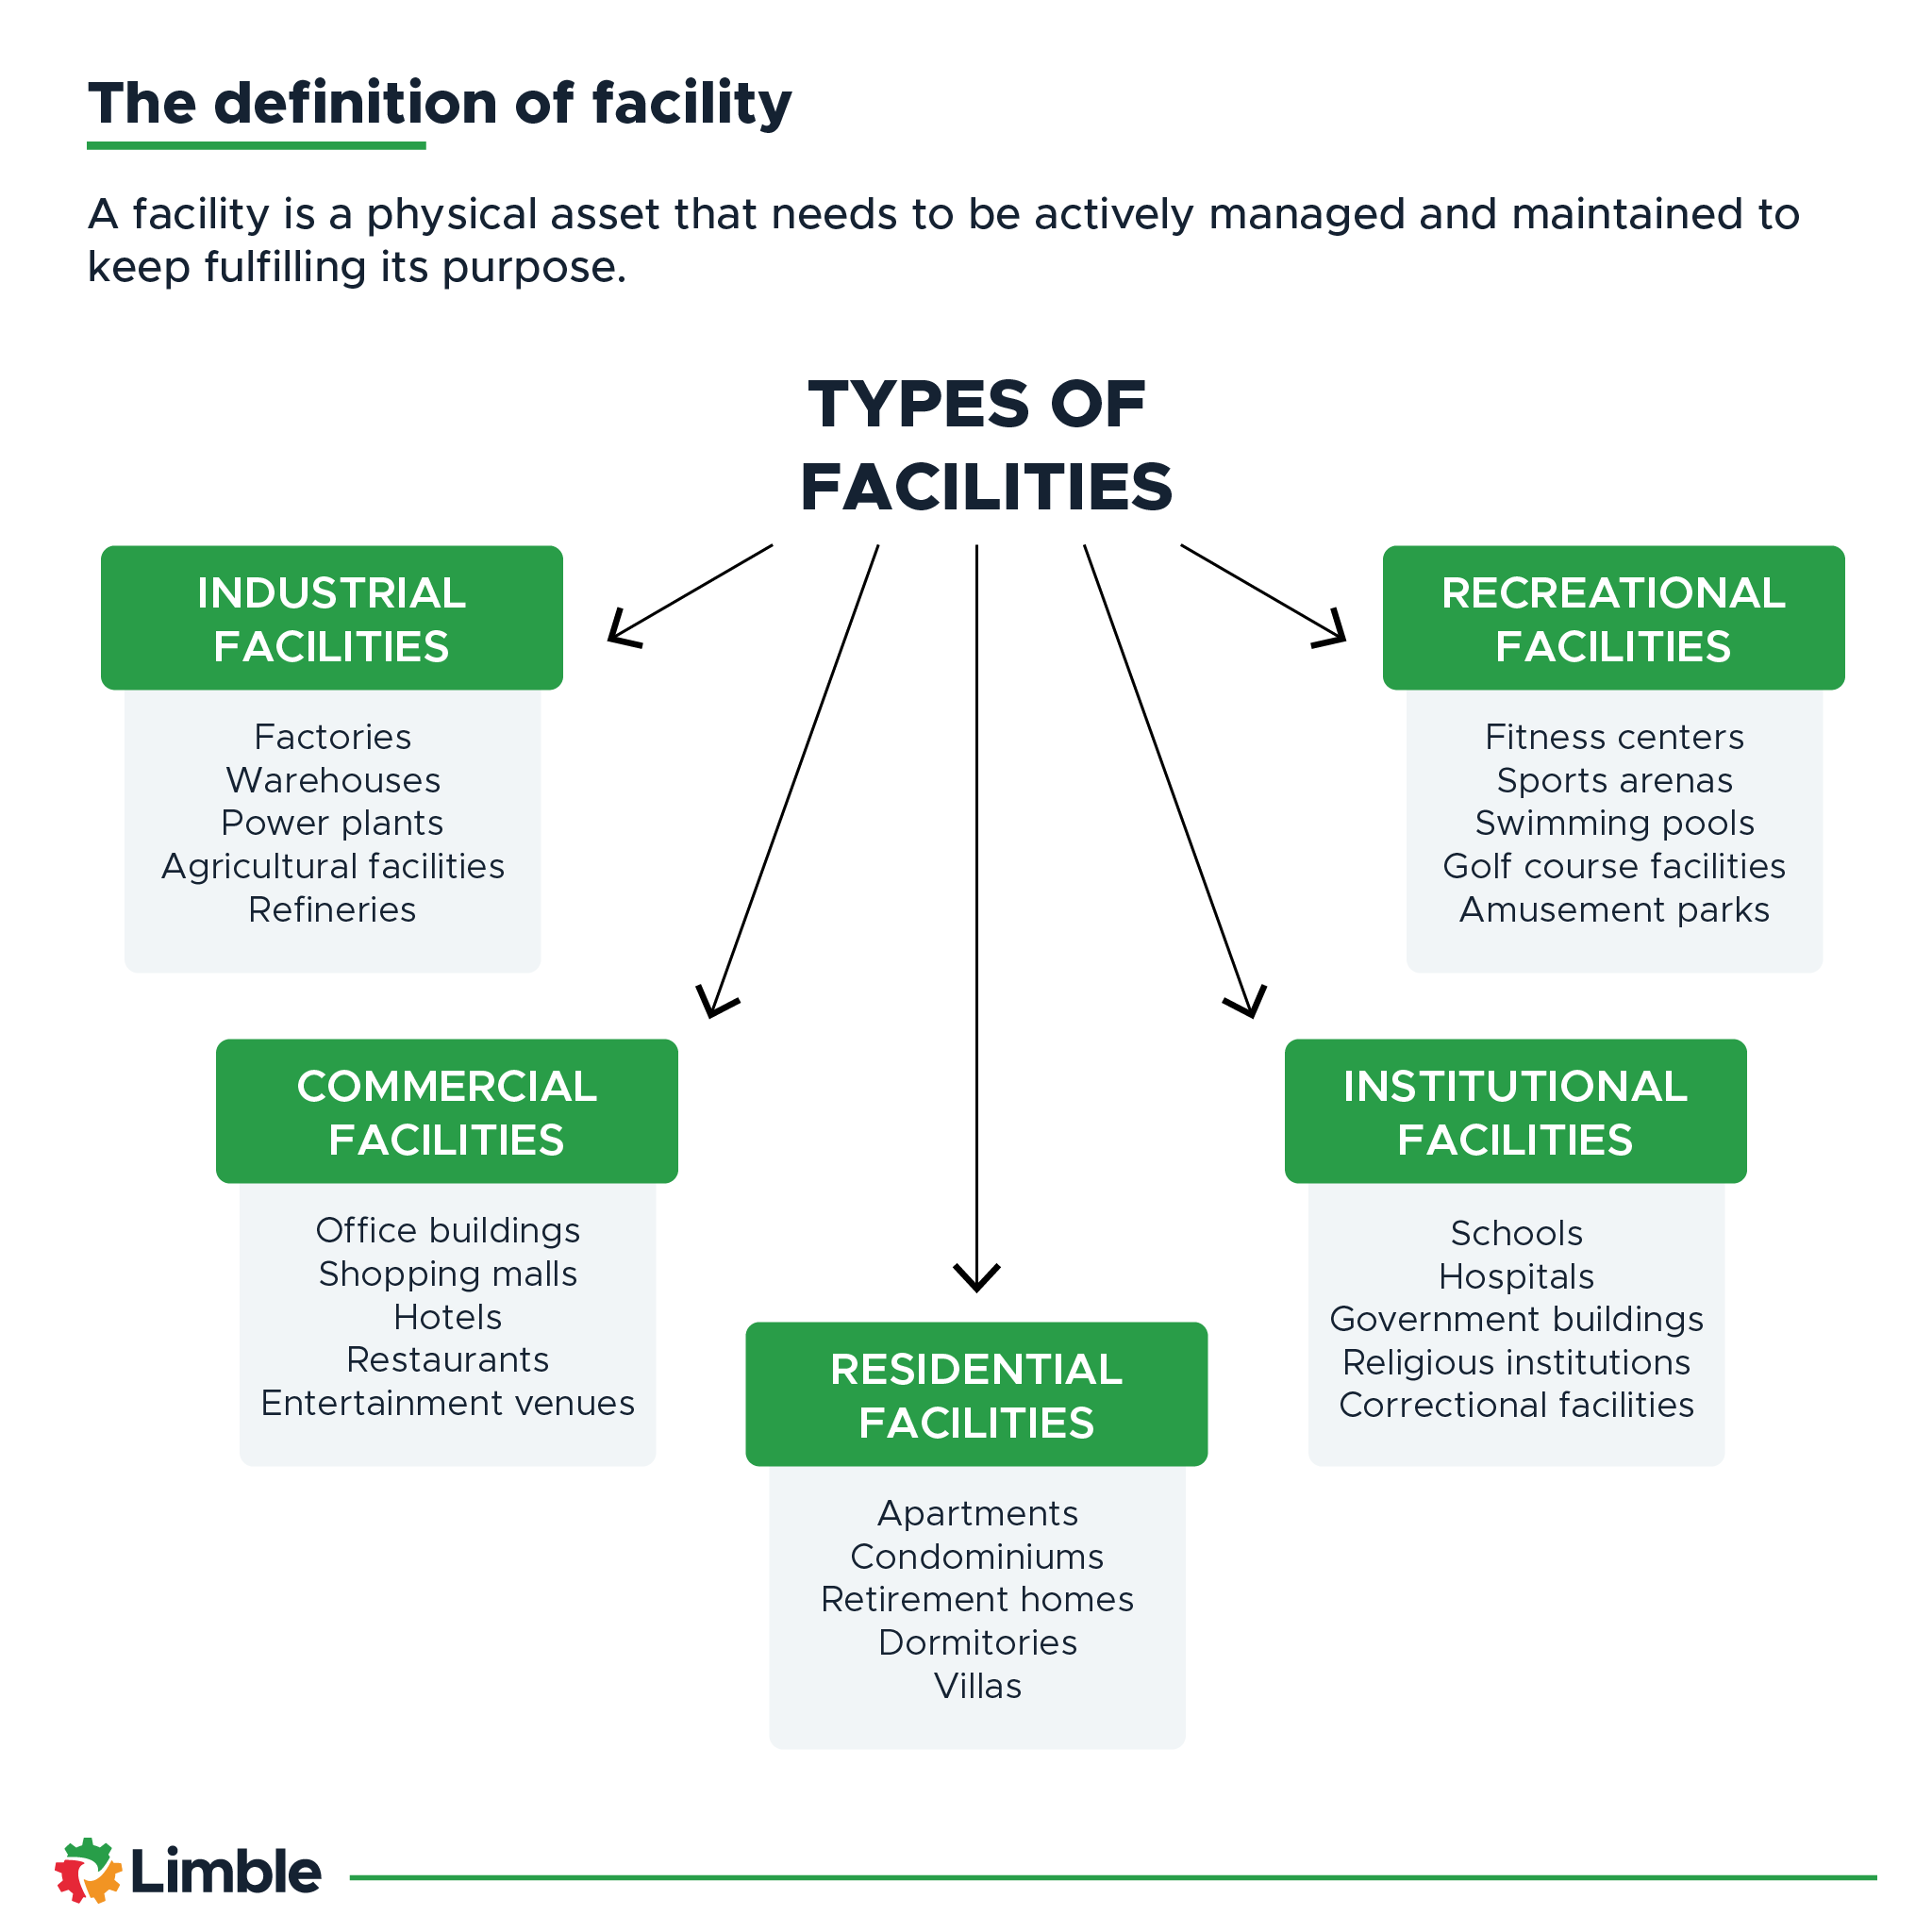 Facility definition plus a breakdown of different types of facilities based on their purpose.